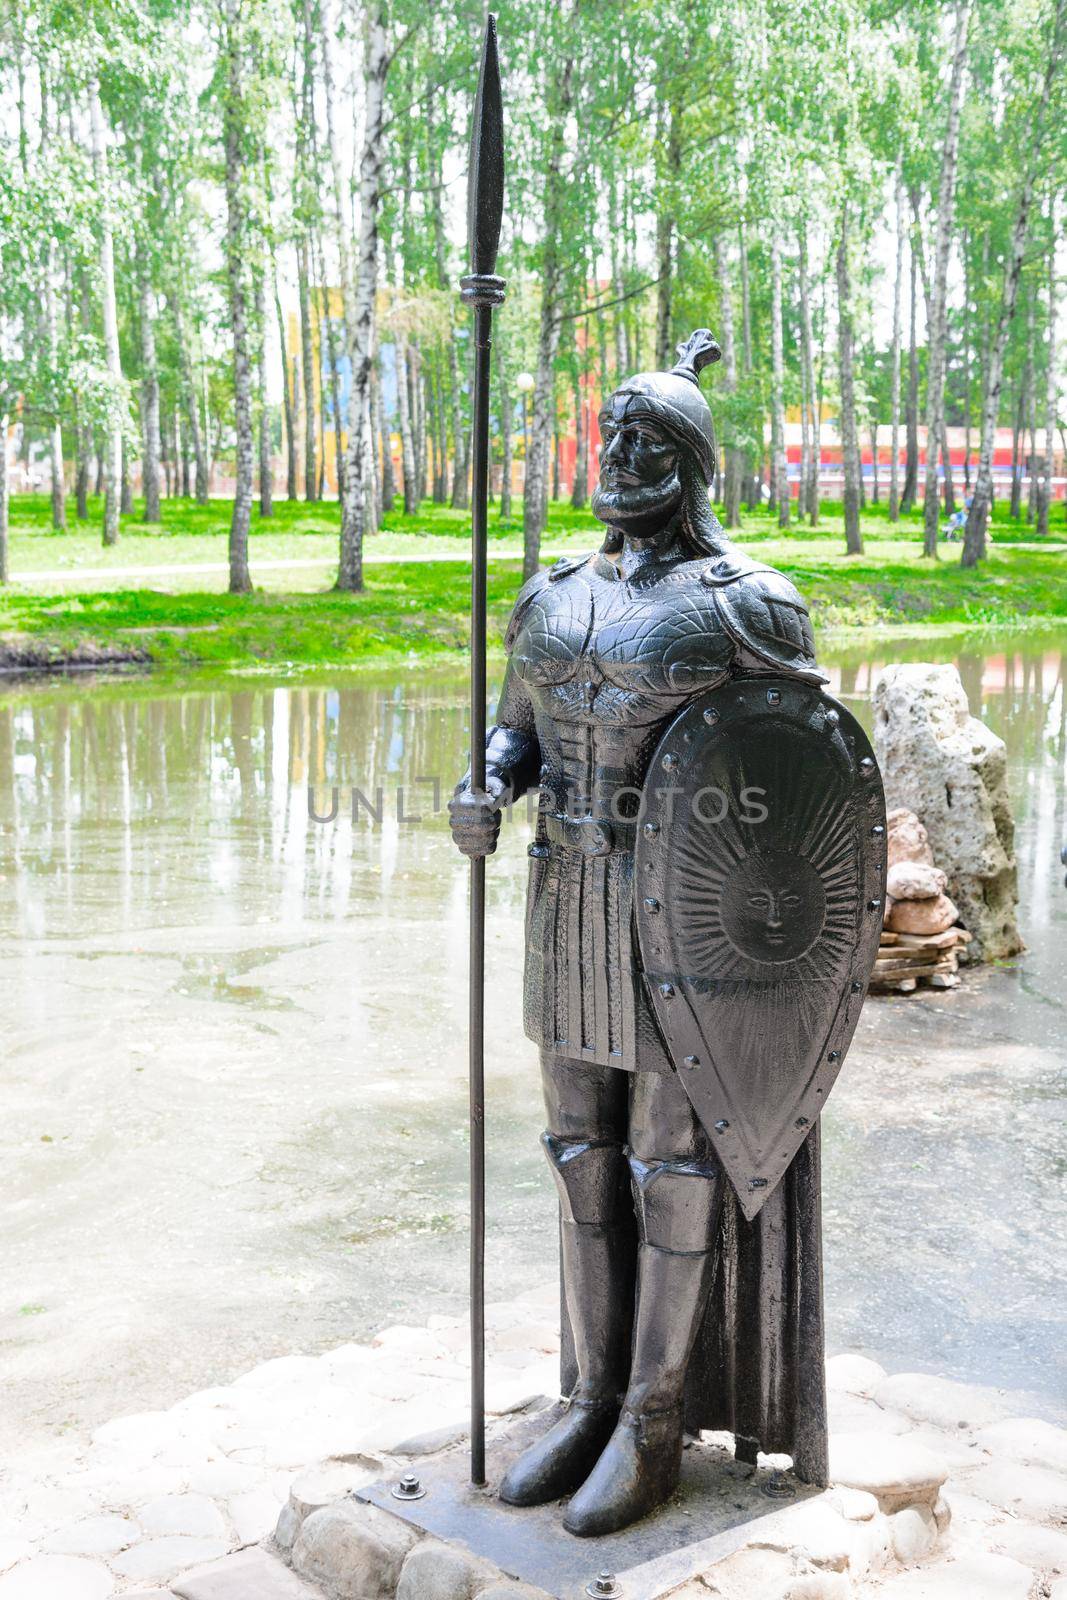 Sculpture black knight with shield and spear cast iron mounted on a nature